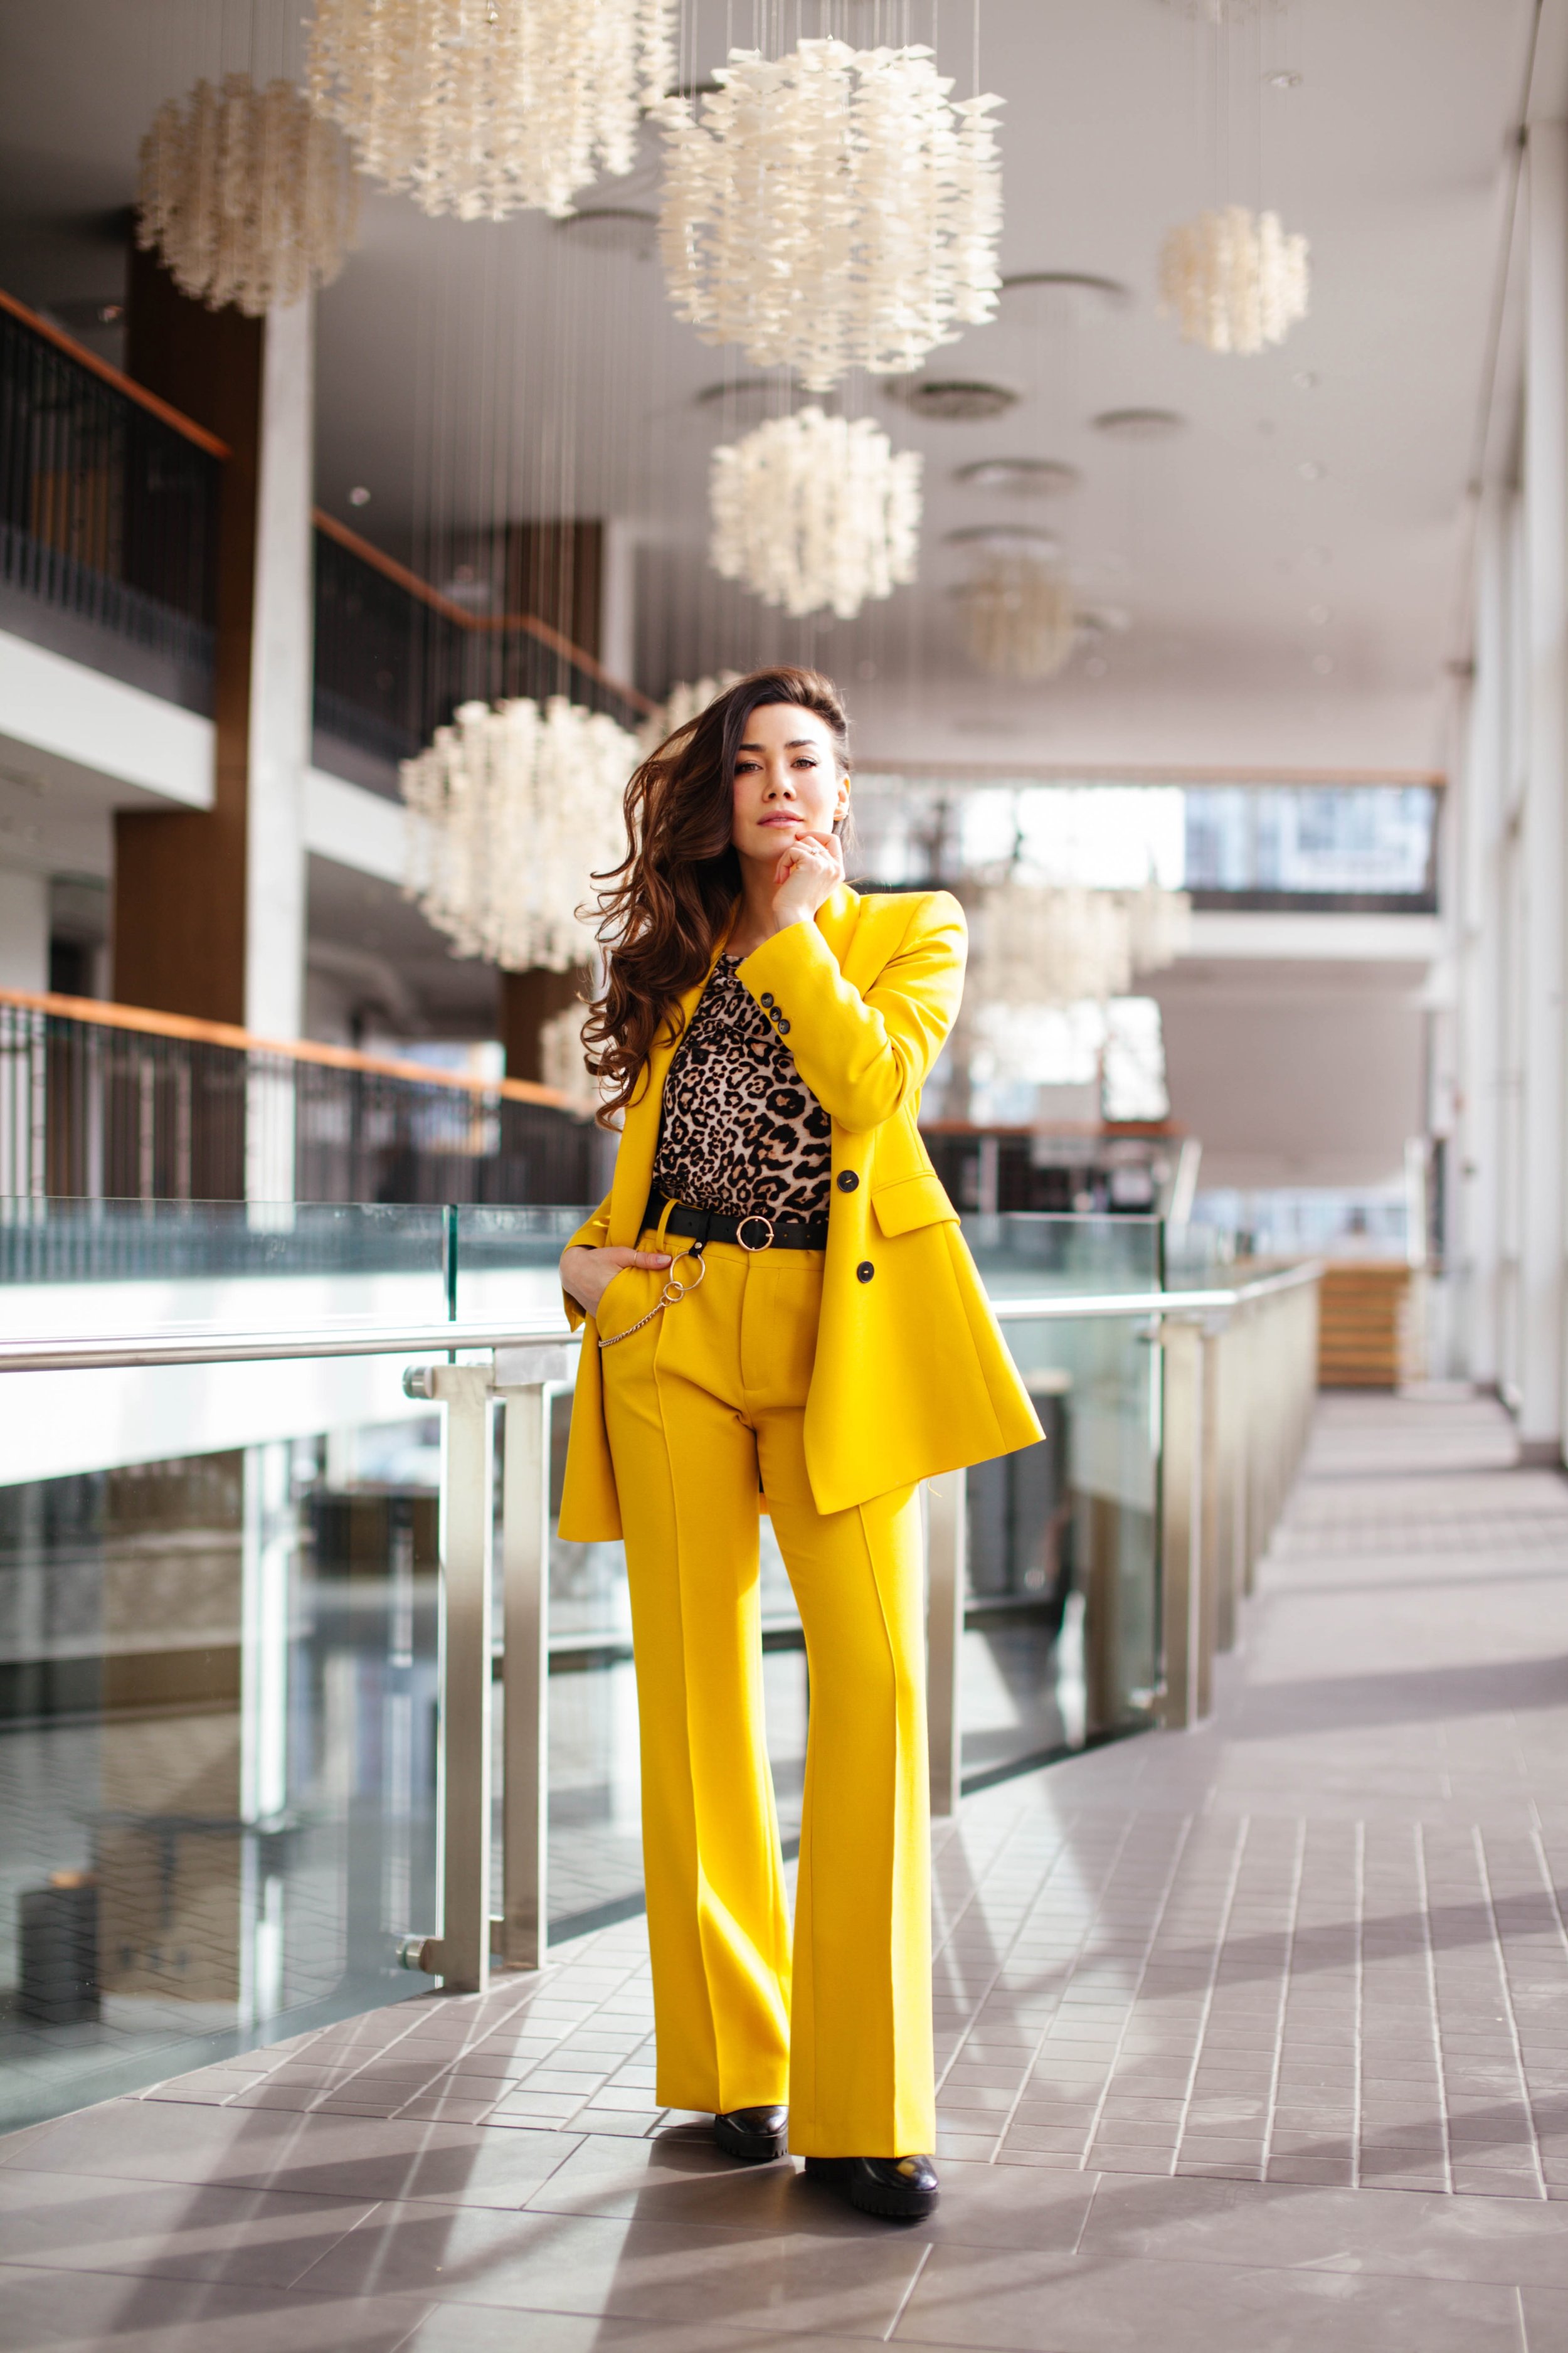 High Quality Double Breasted Yellow Pants Suit For Women Long Sleeve Blazer  For Business And Office Autumn Yellow Suits For Ladies 201030 From Dou01,  $24.56 | DHgate.Com